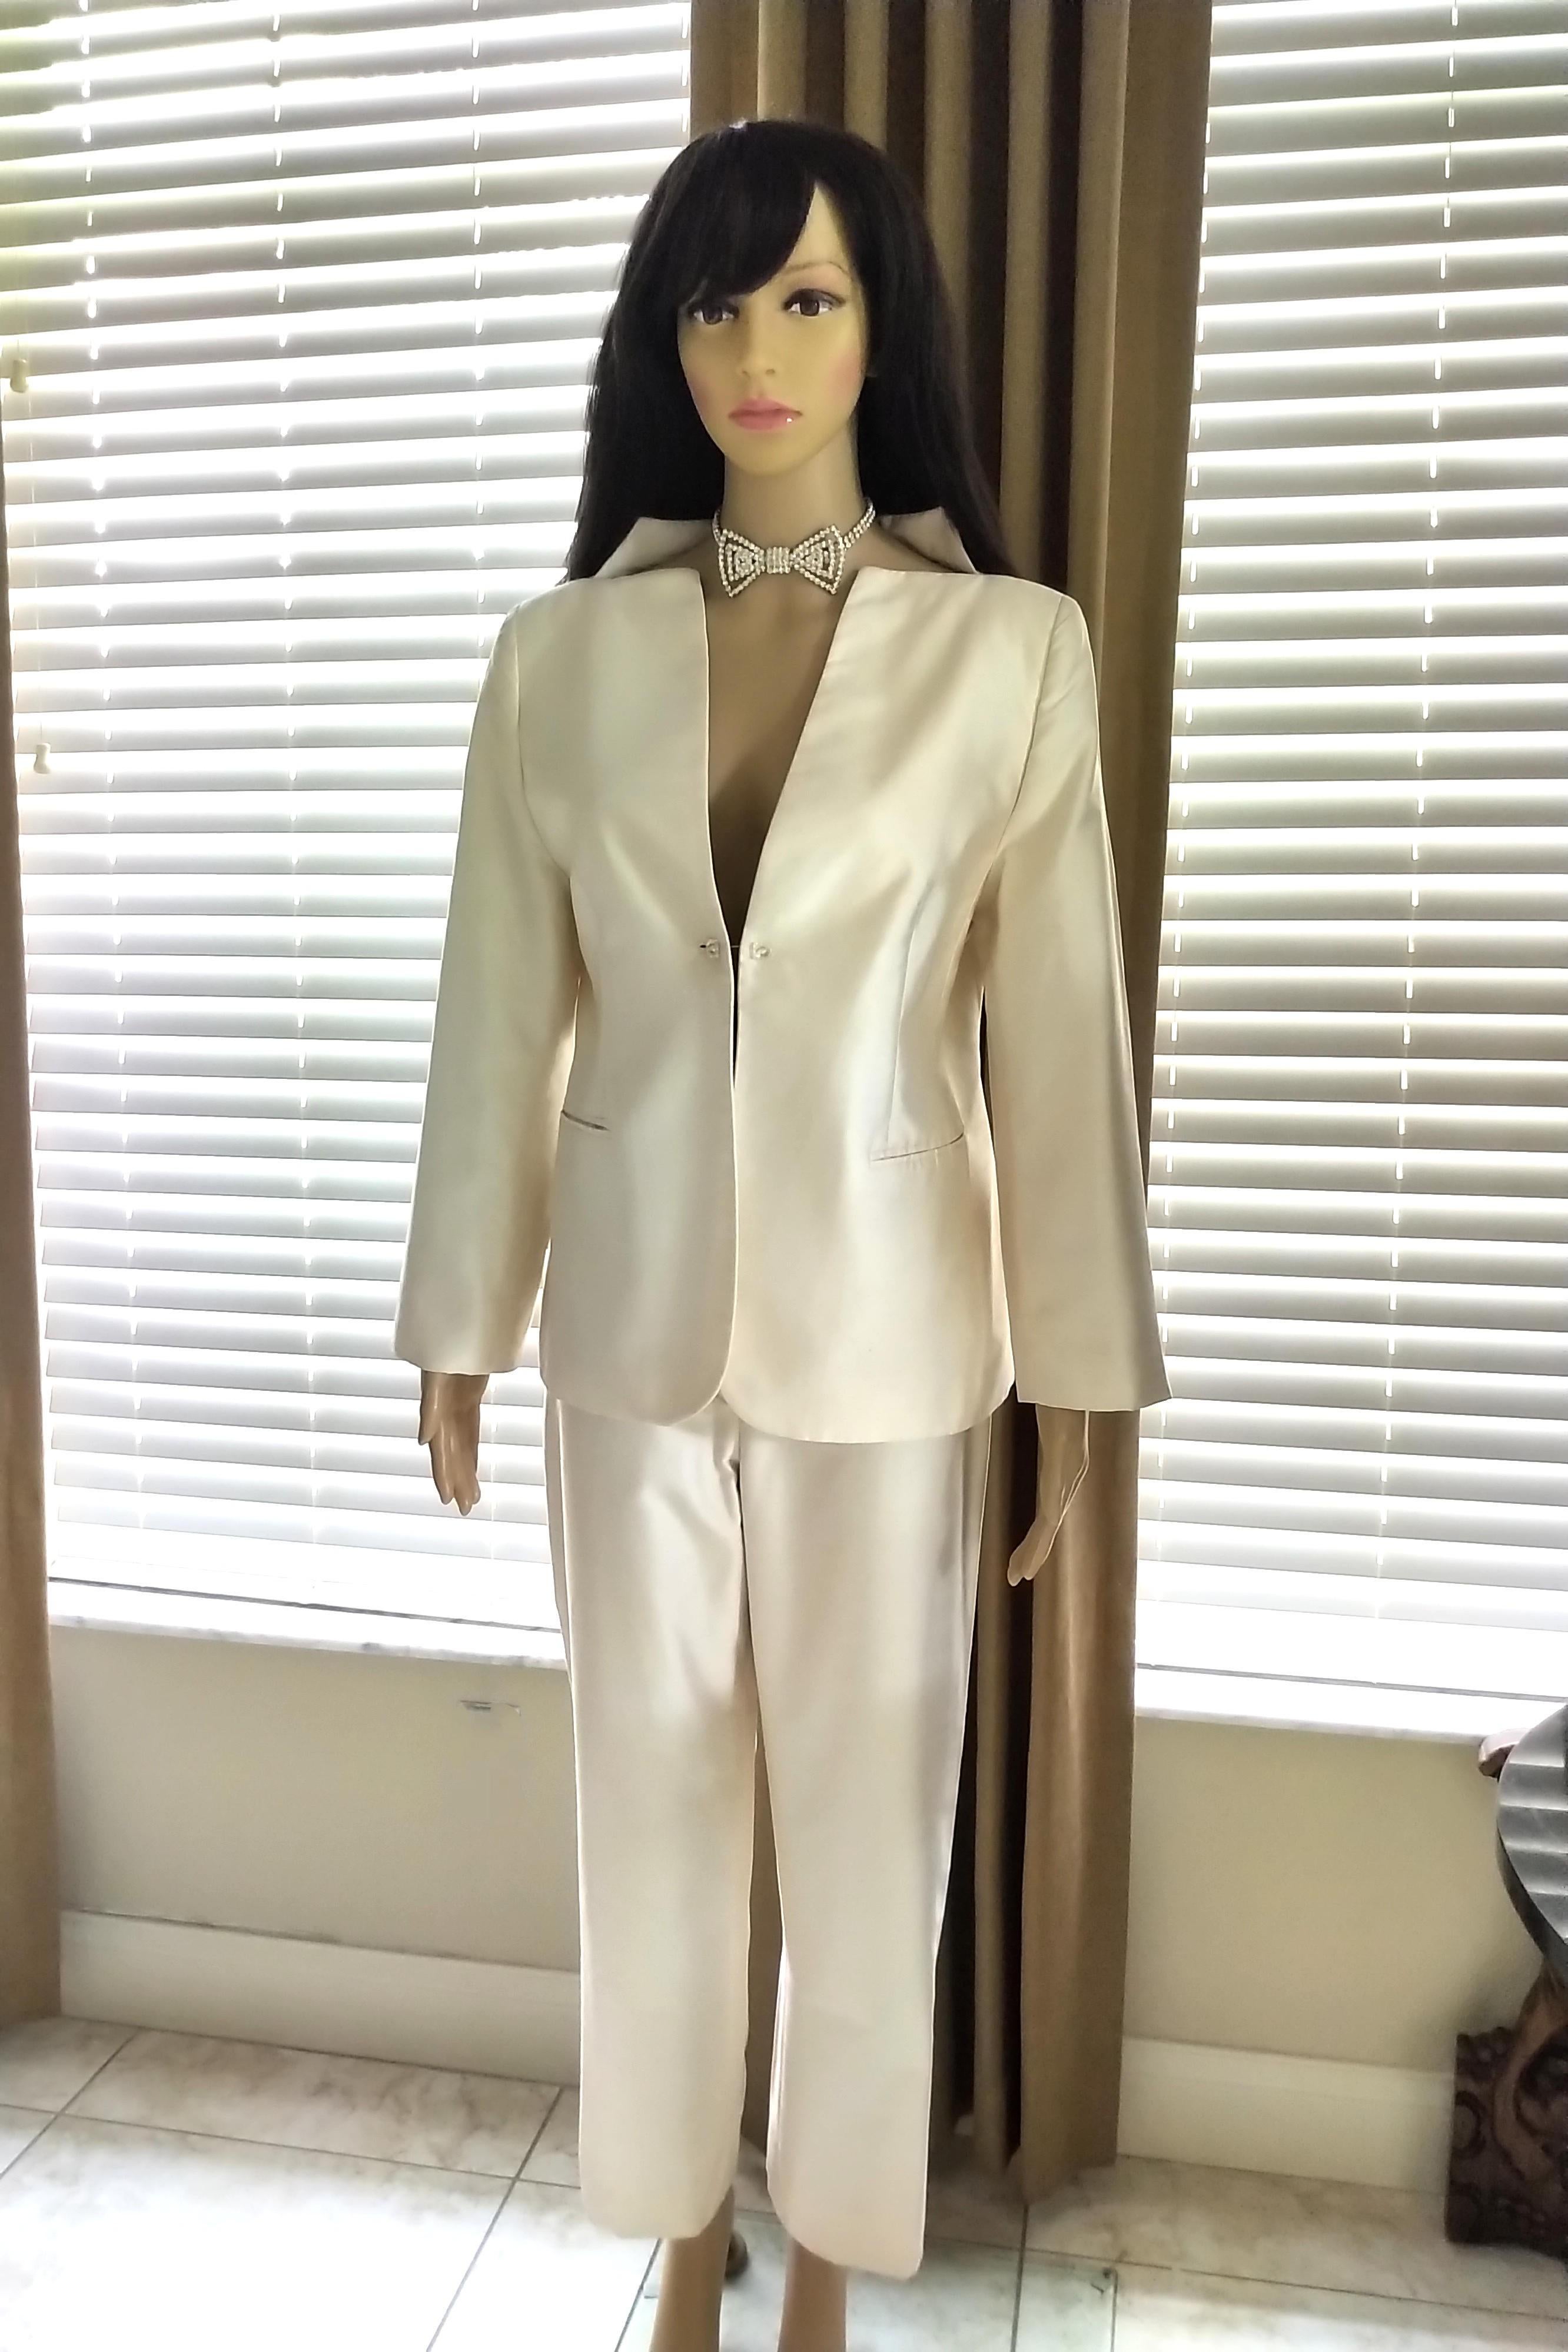 Women's 1990's Gianni Versace Couture Cream Silk Shimmer Crystal Jacket Pant Suit 42/ 6 For Sale